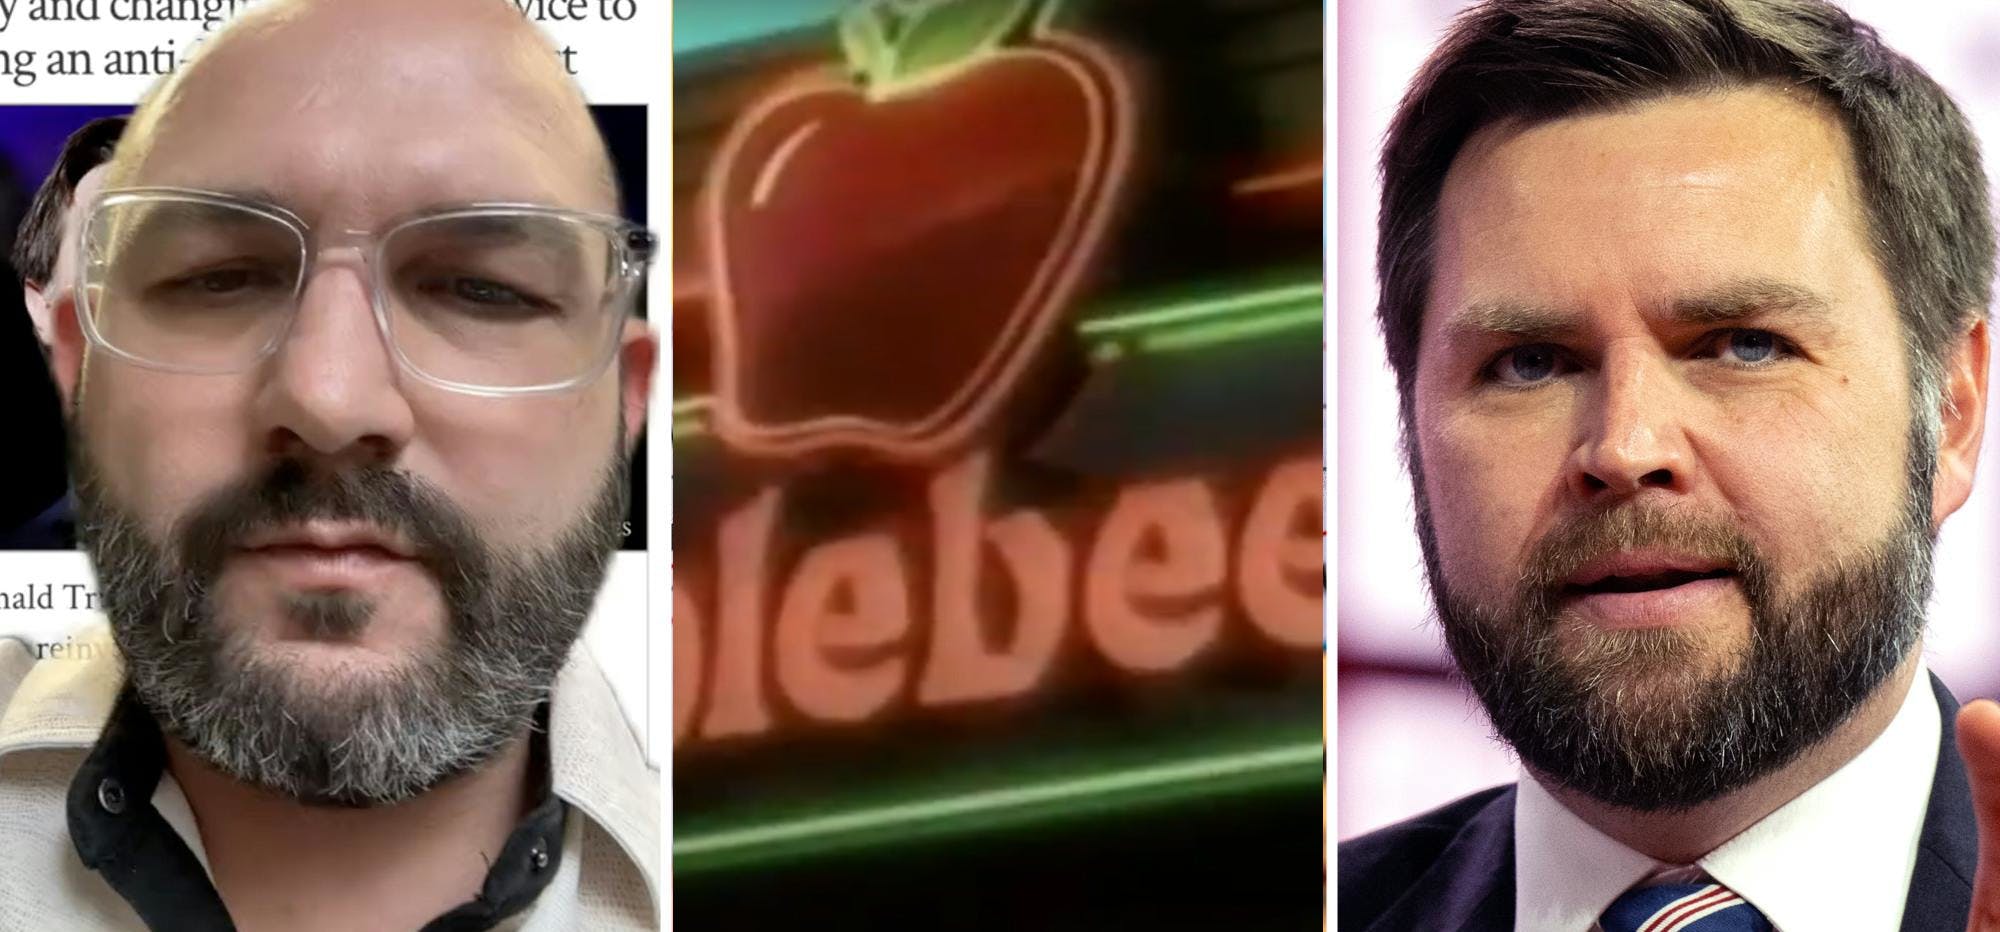 ‘I was not going to take one for the team’: Man claims he went on Applebee’s date with JD Vance in 2001